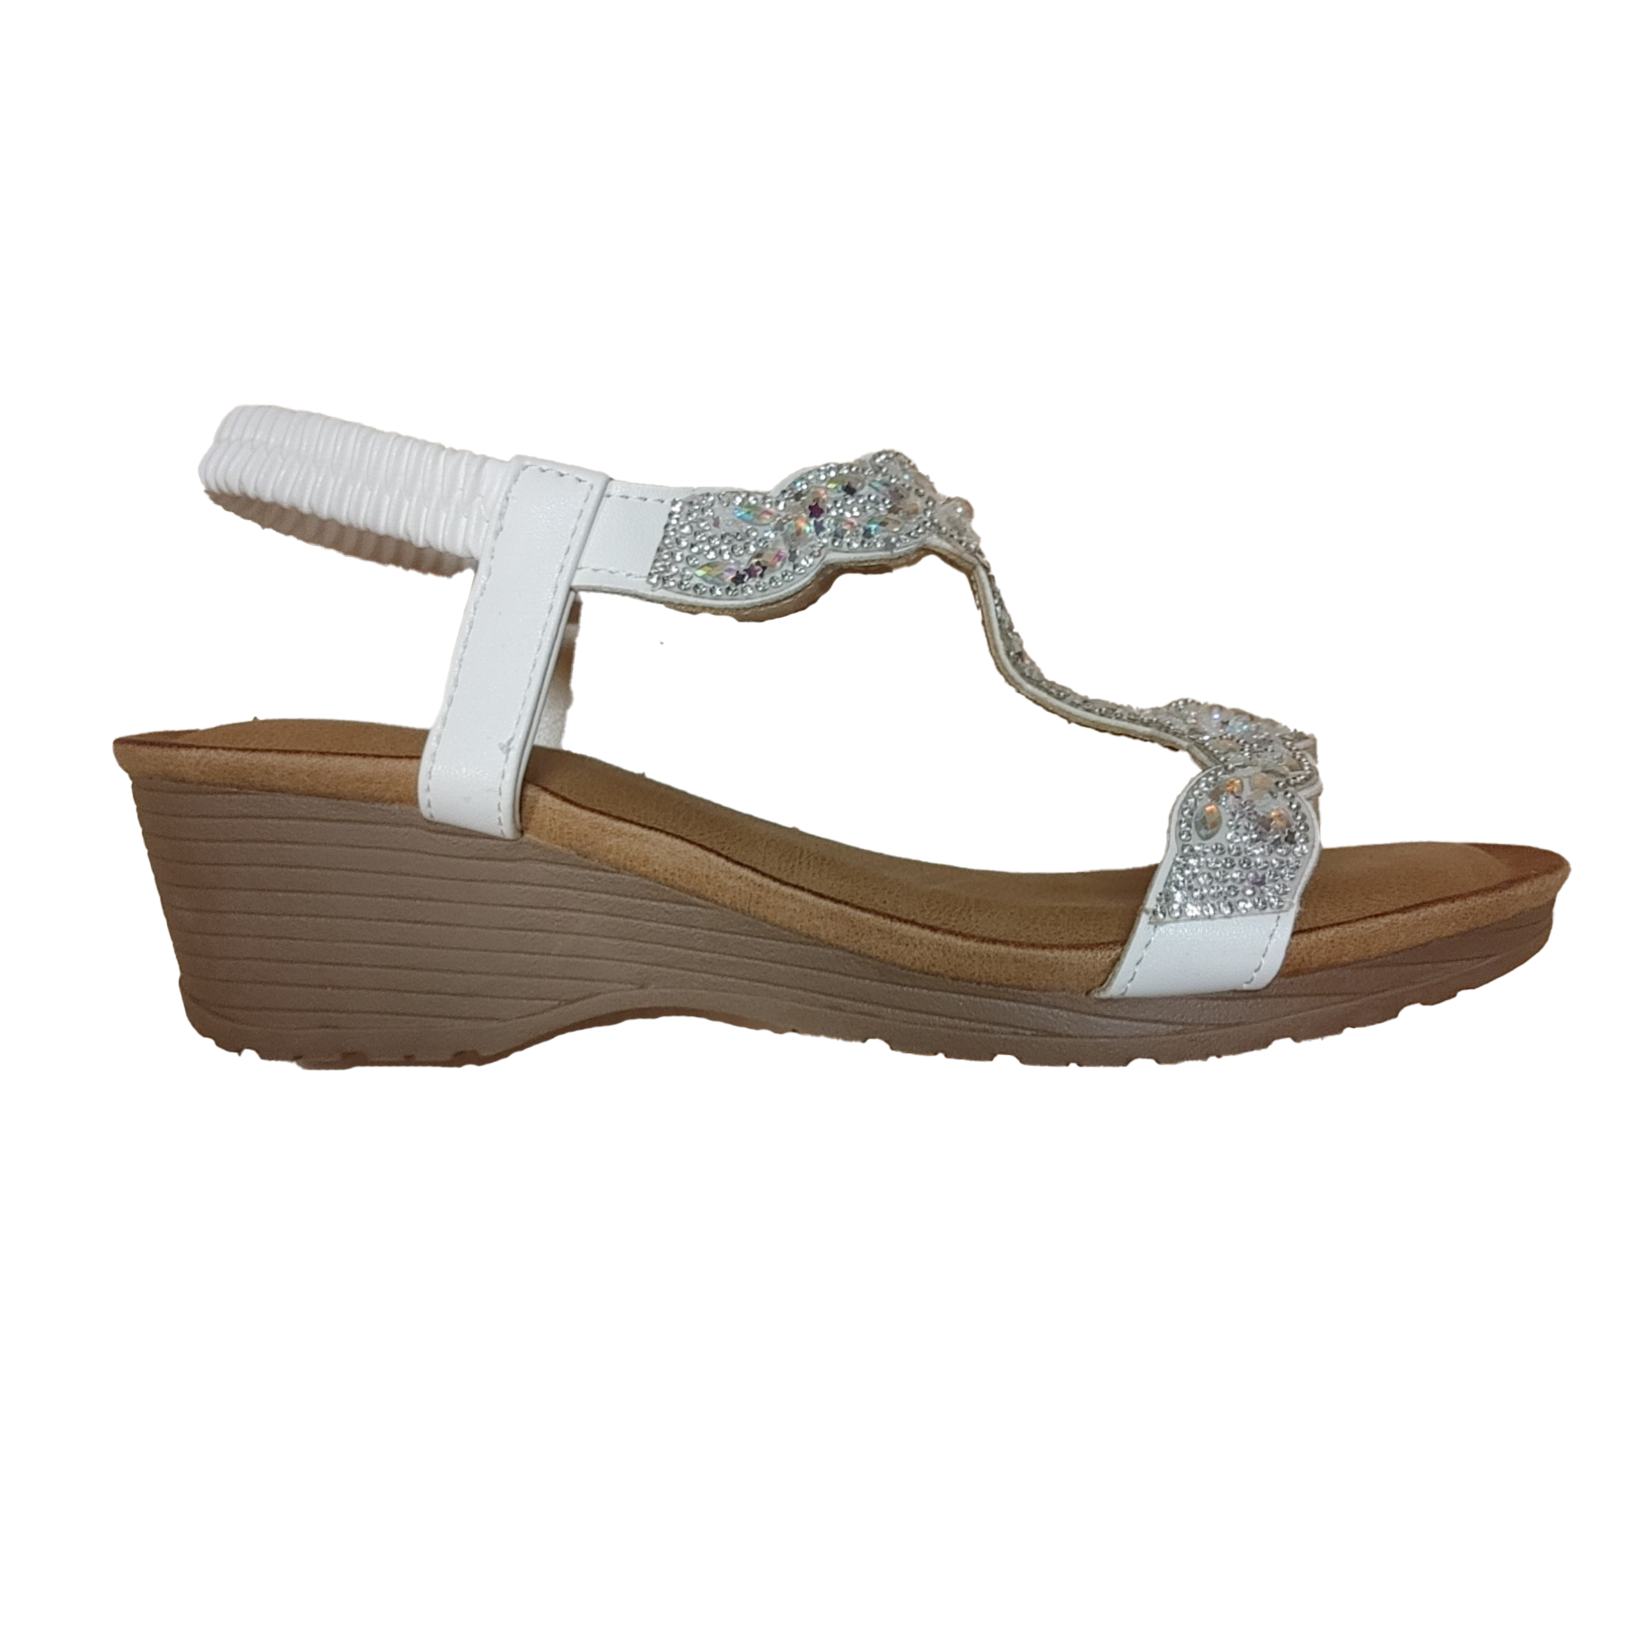 Miss Sweet Miss Sweet wedge sandal with rhinestones and wrap around ankle, sandals